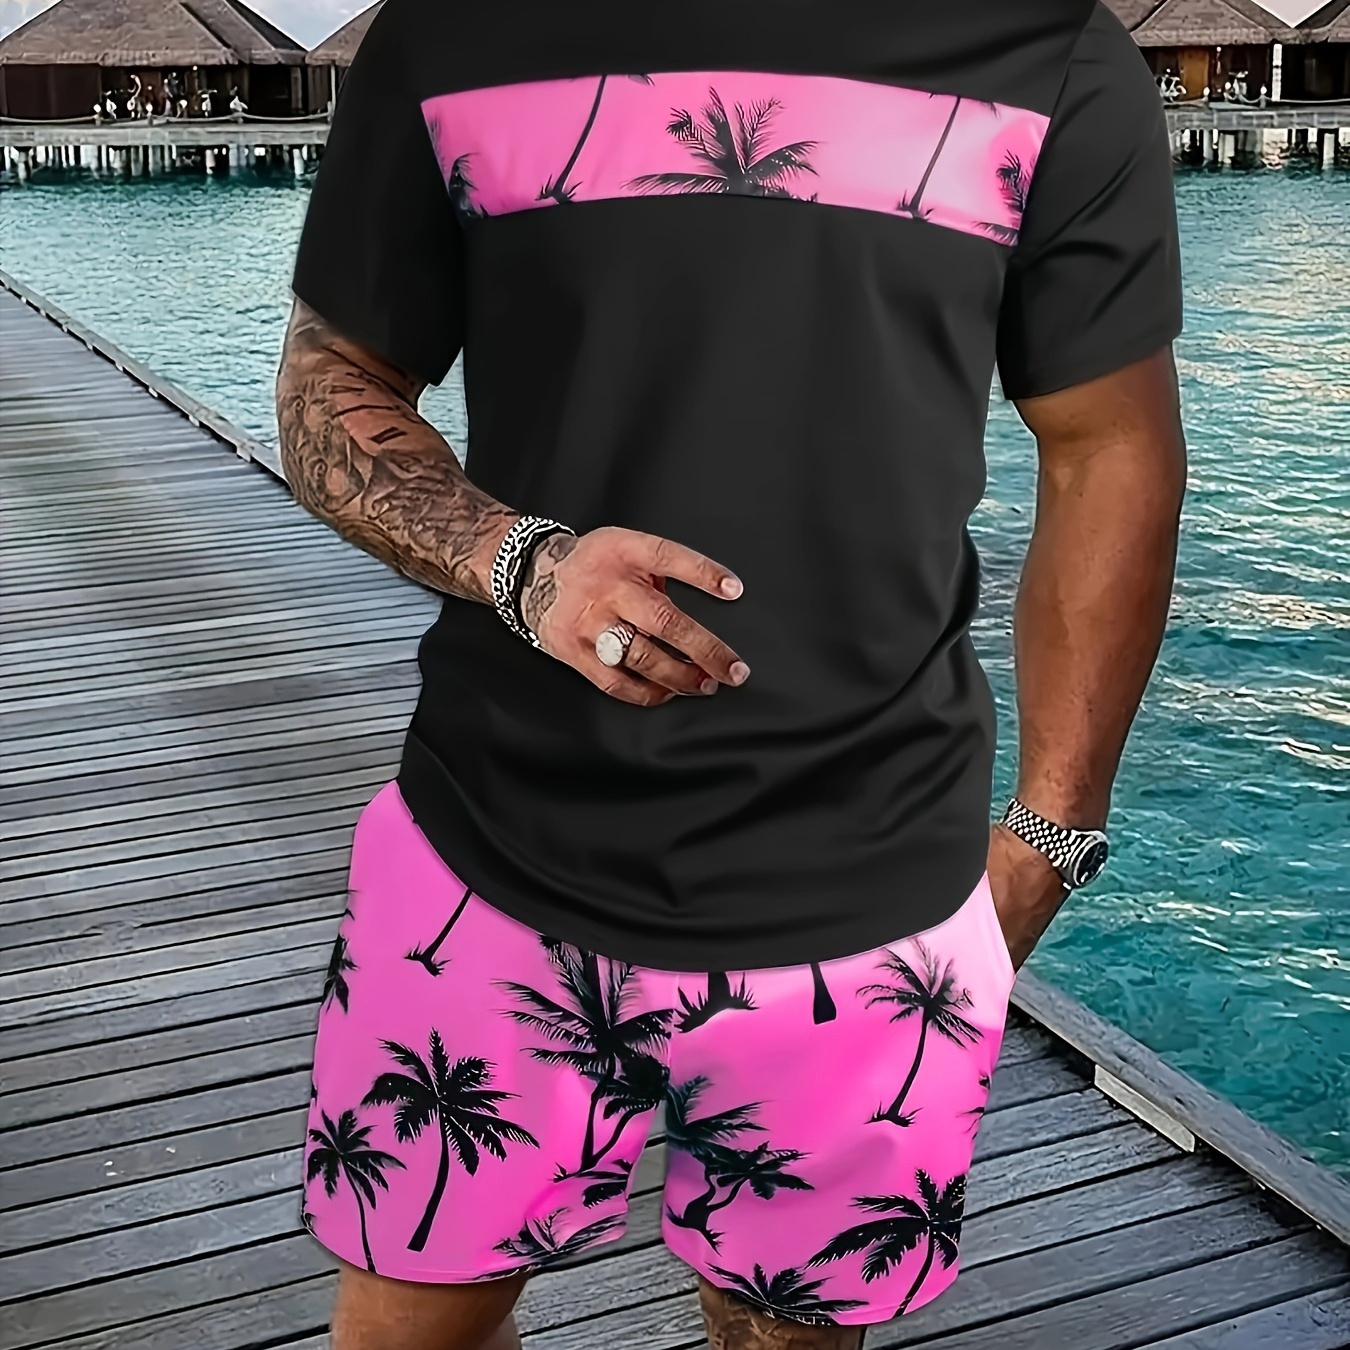 

Mens Tropical Coconut Tree Printed Short Sleeve Tee & Drawstring Pocket Shorts Set - Lightweight, Comfortable, 2-piece Summer Outfit For Stylish Casual Wear